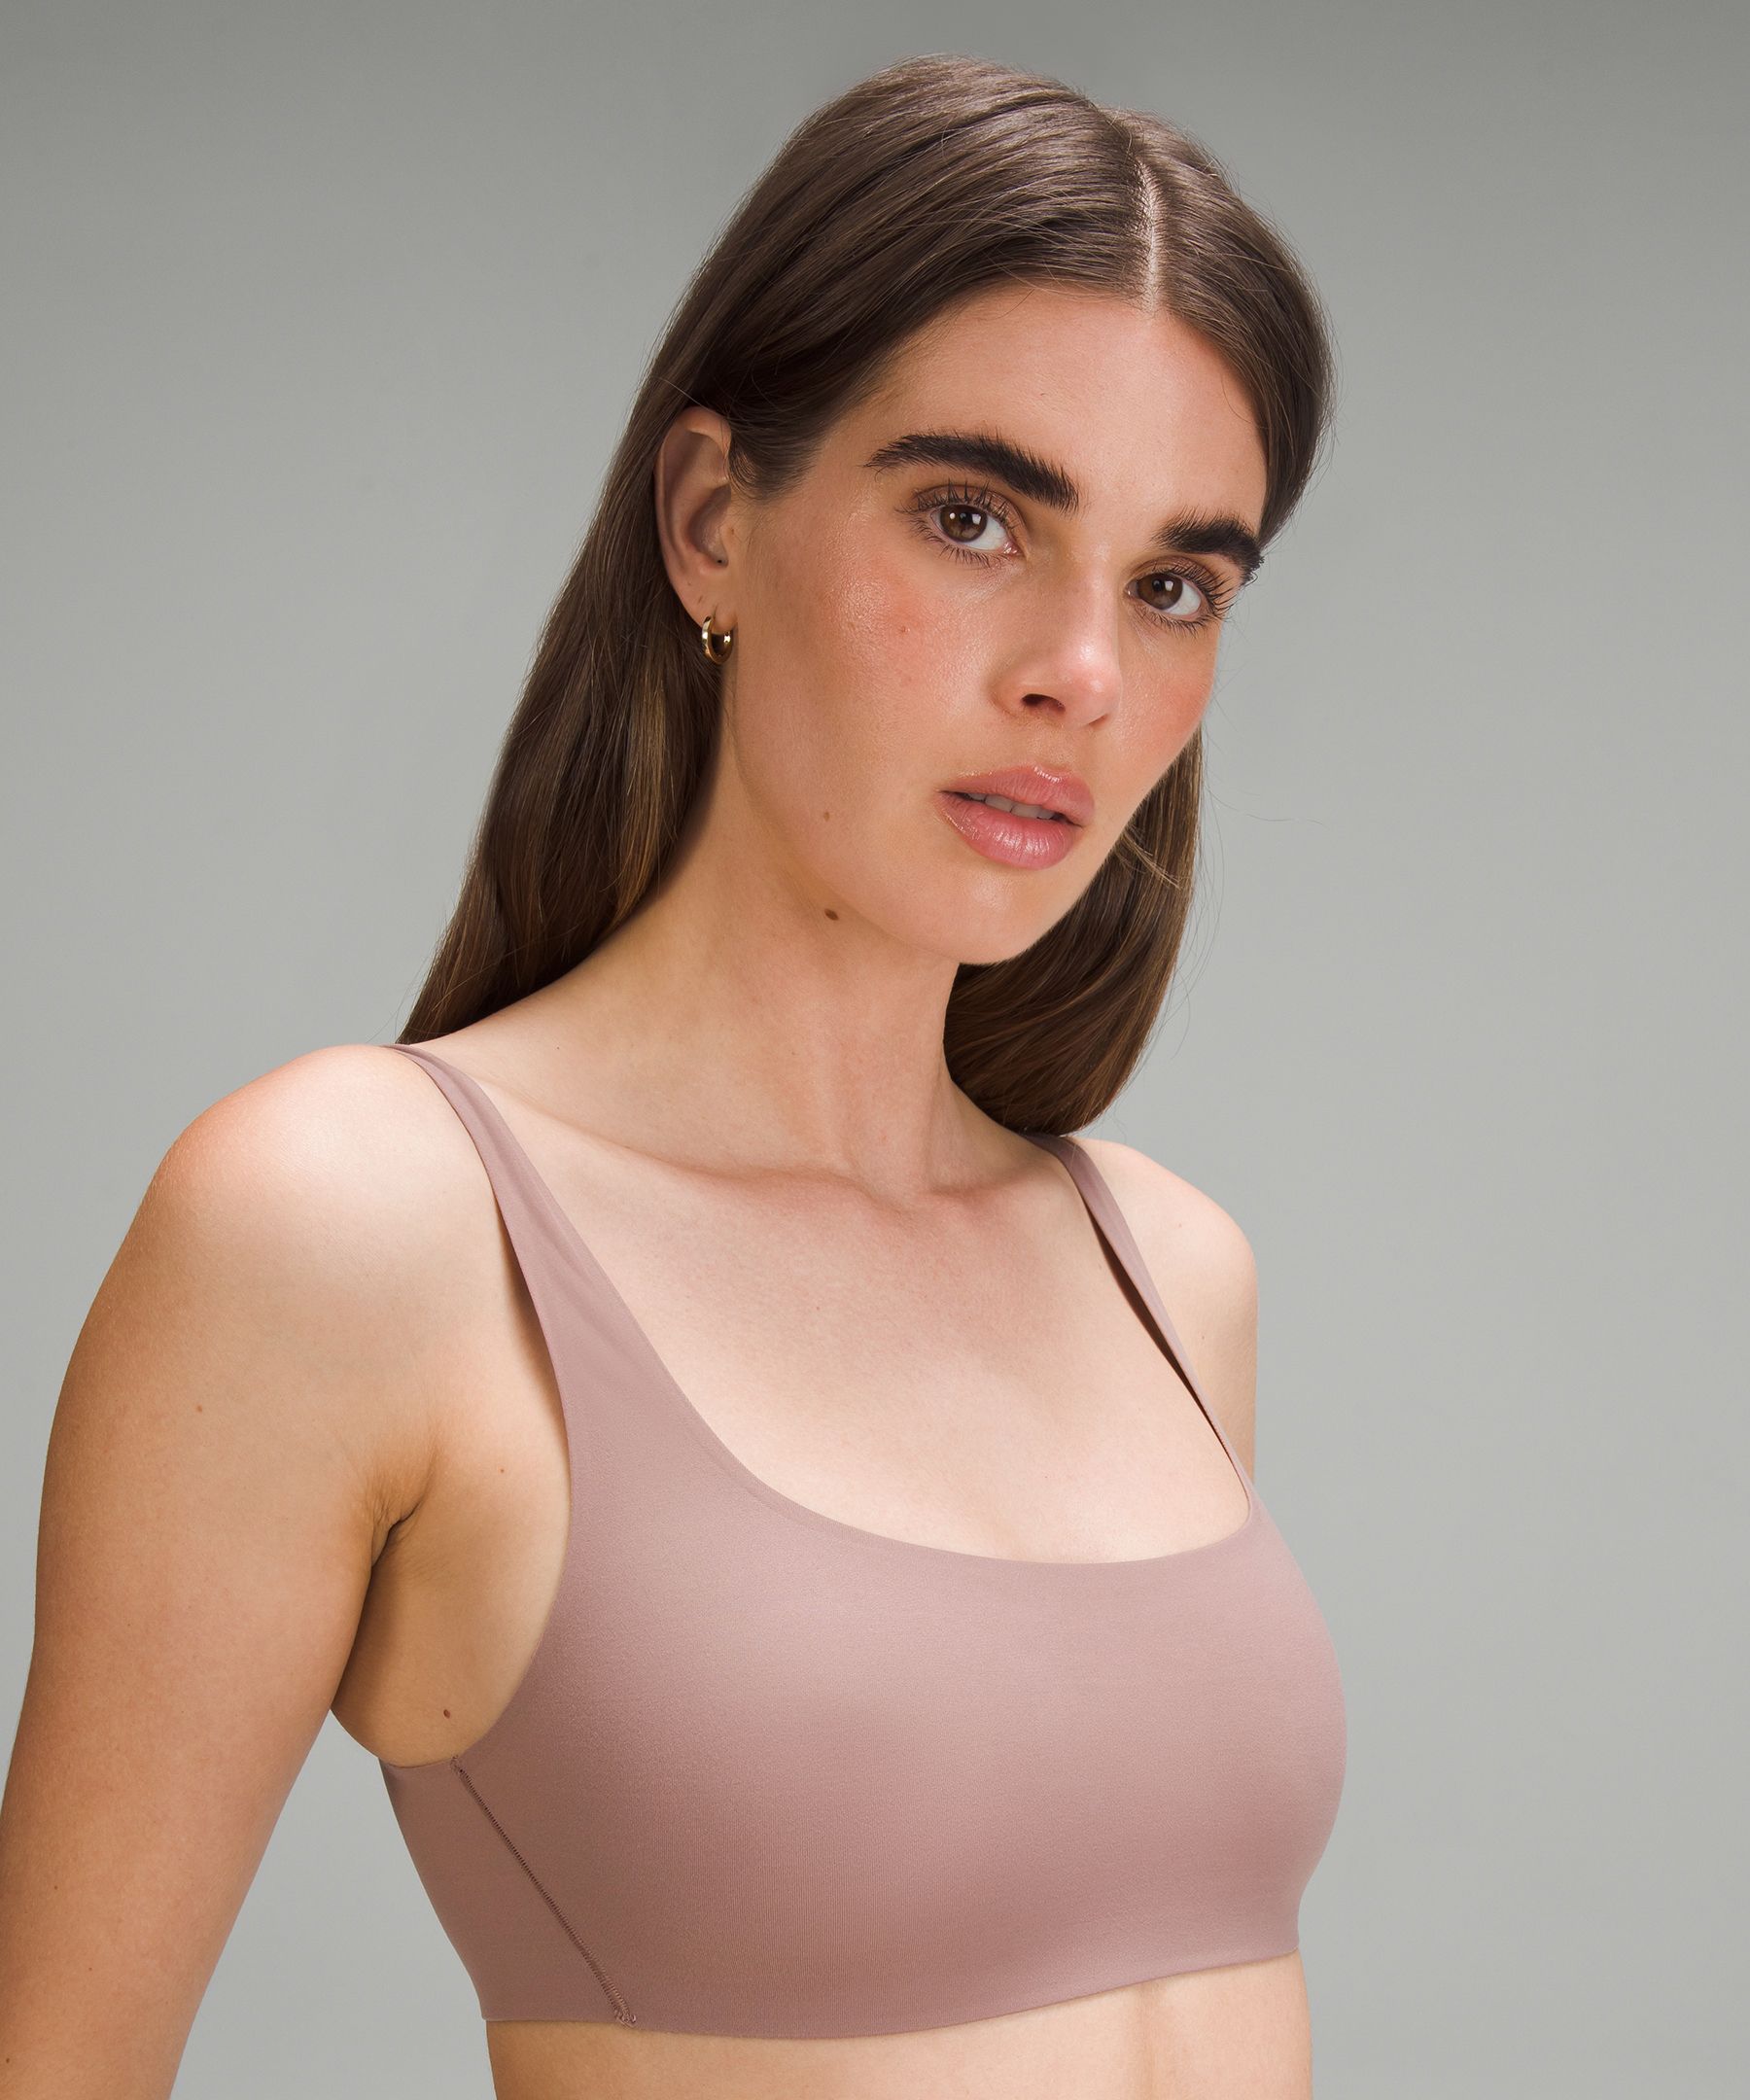 This Lululemon scoop bra is so comfortable, it's the only one I'd